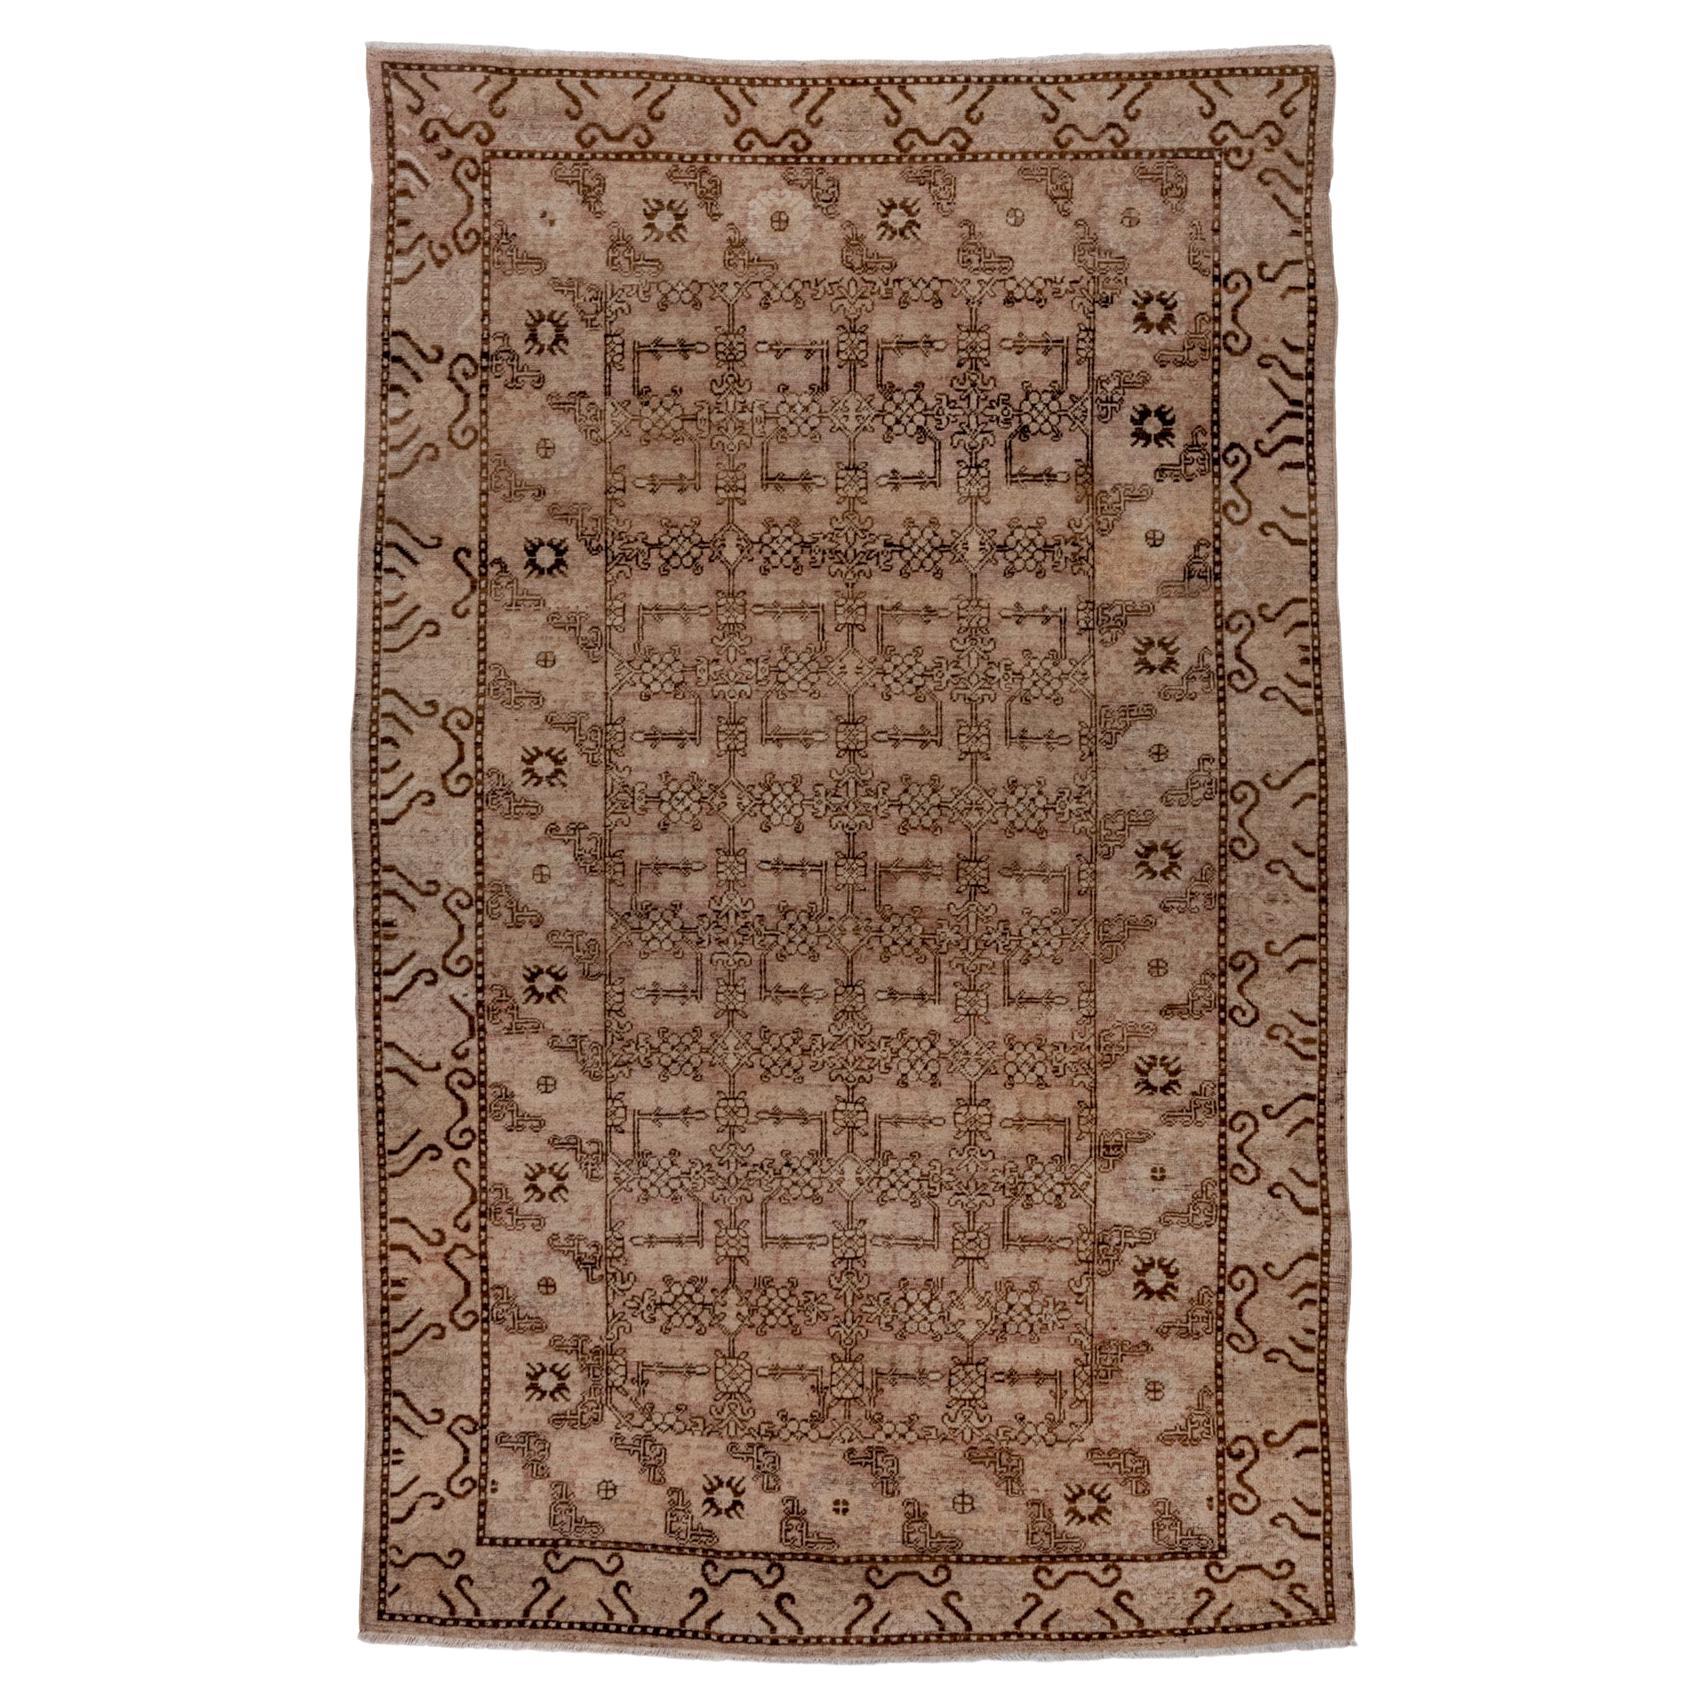 Eliko Rugs by David Ariel Antique Neutral Khotan Rug, Allover Pomegranate Field For Sale